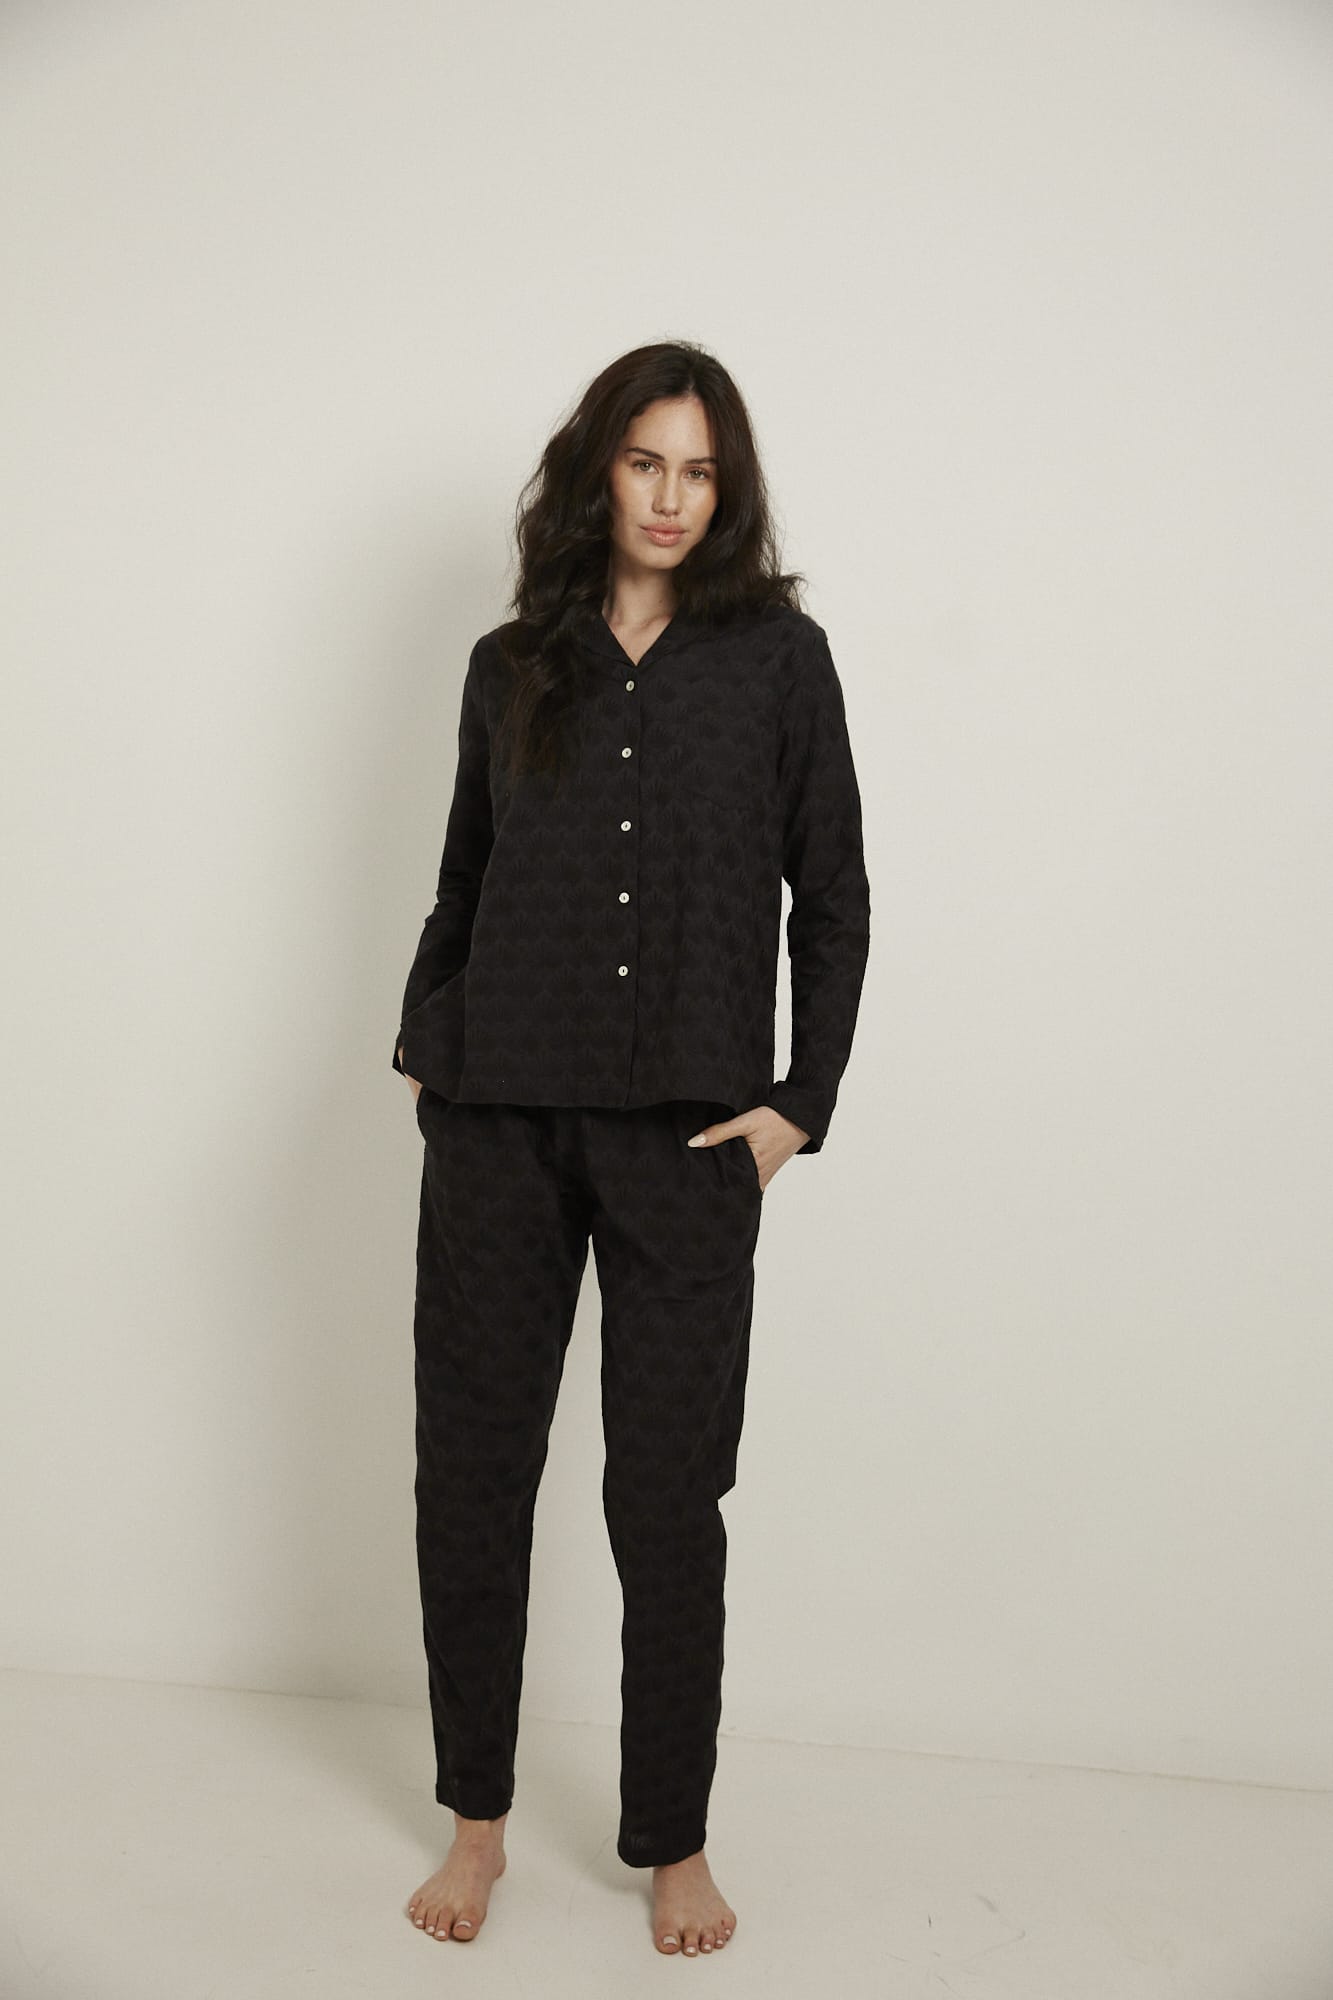 Women’s pyjama set including a long sleeve shirt and long sleeve pants. Made from 100% organic cotton, in black colour featuring delicate all over embroidery. The shirt has shell buttons, a front pocket and a back pleat.  The pants feature an elasticated waistband for comfort.